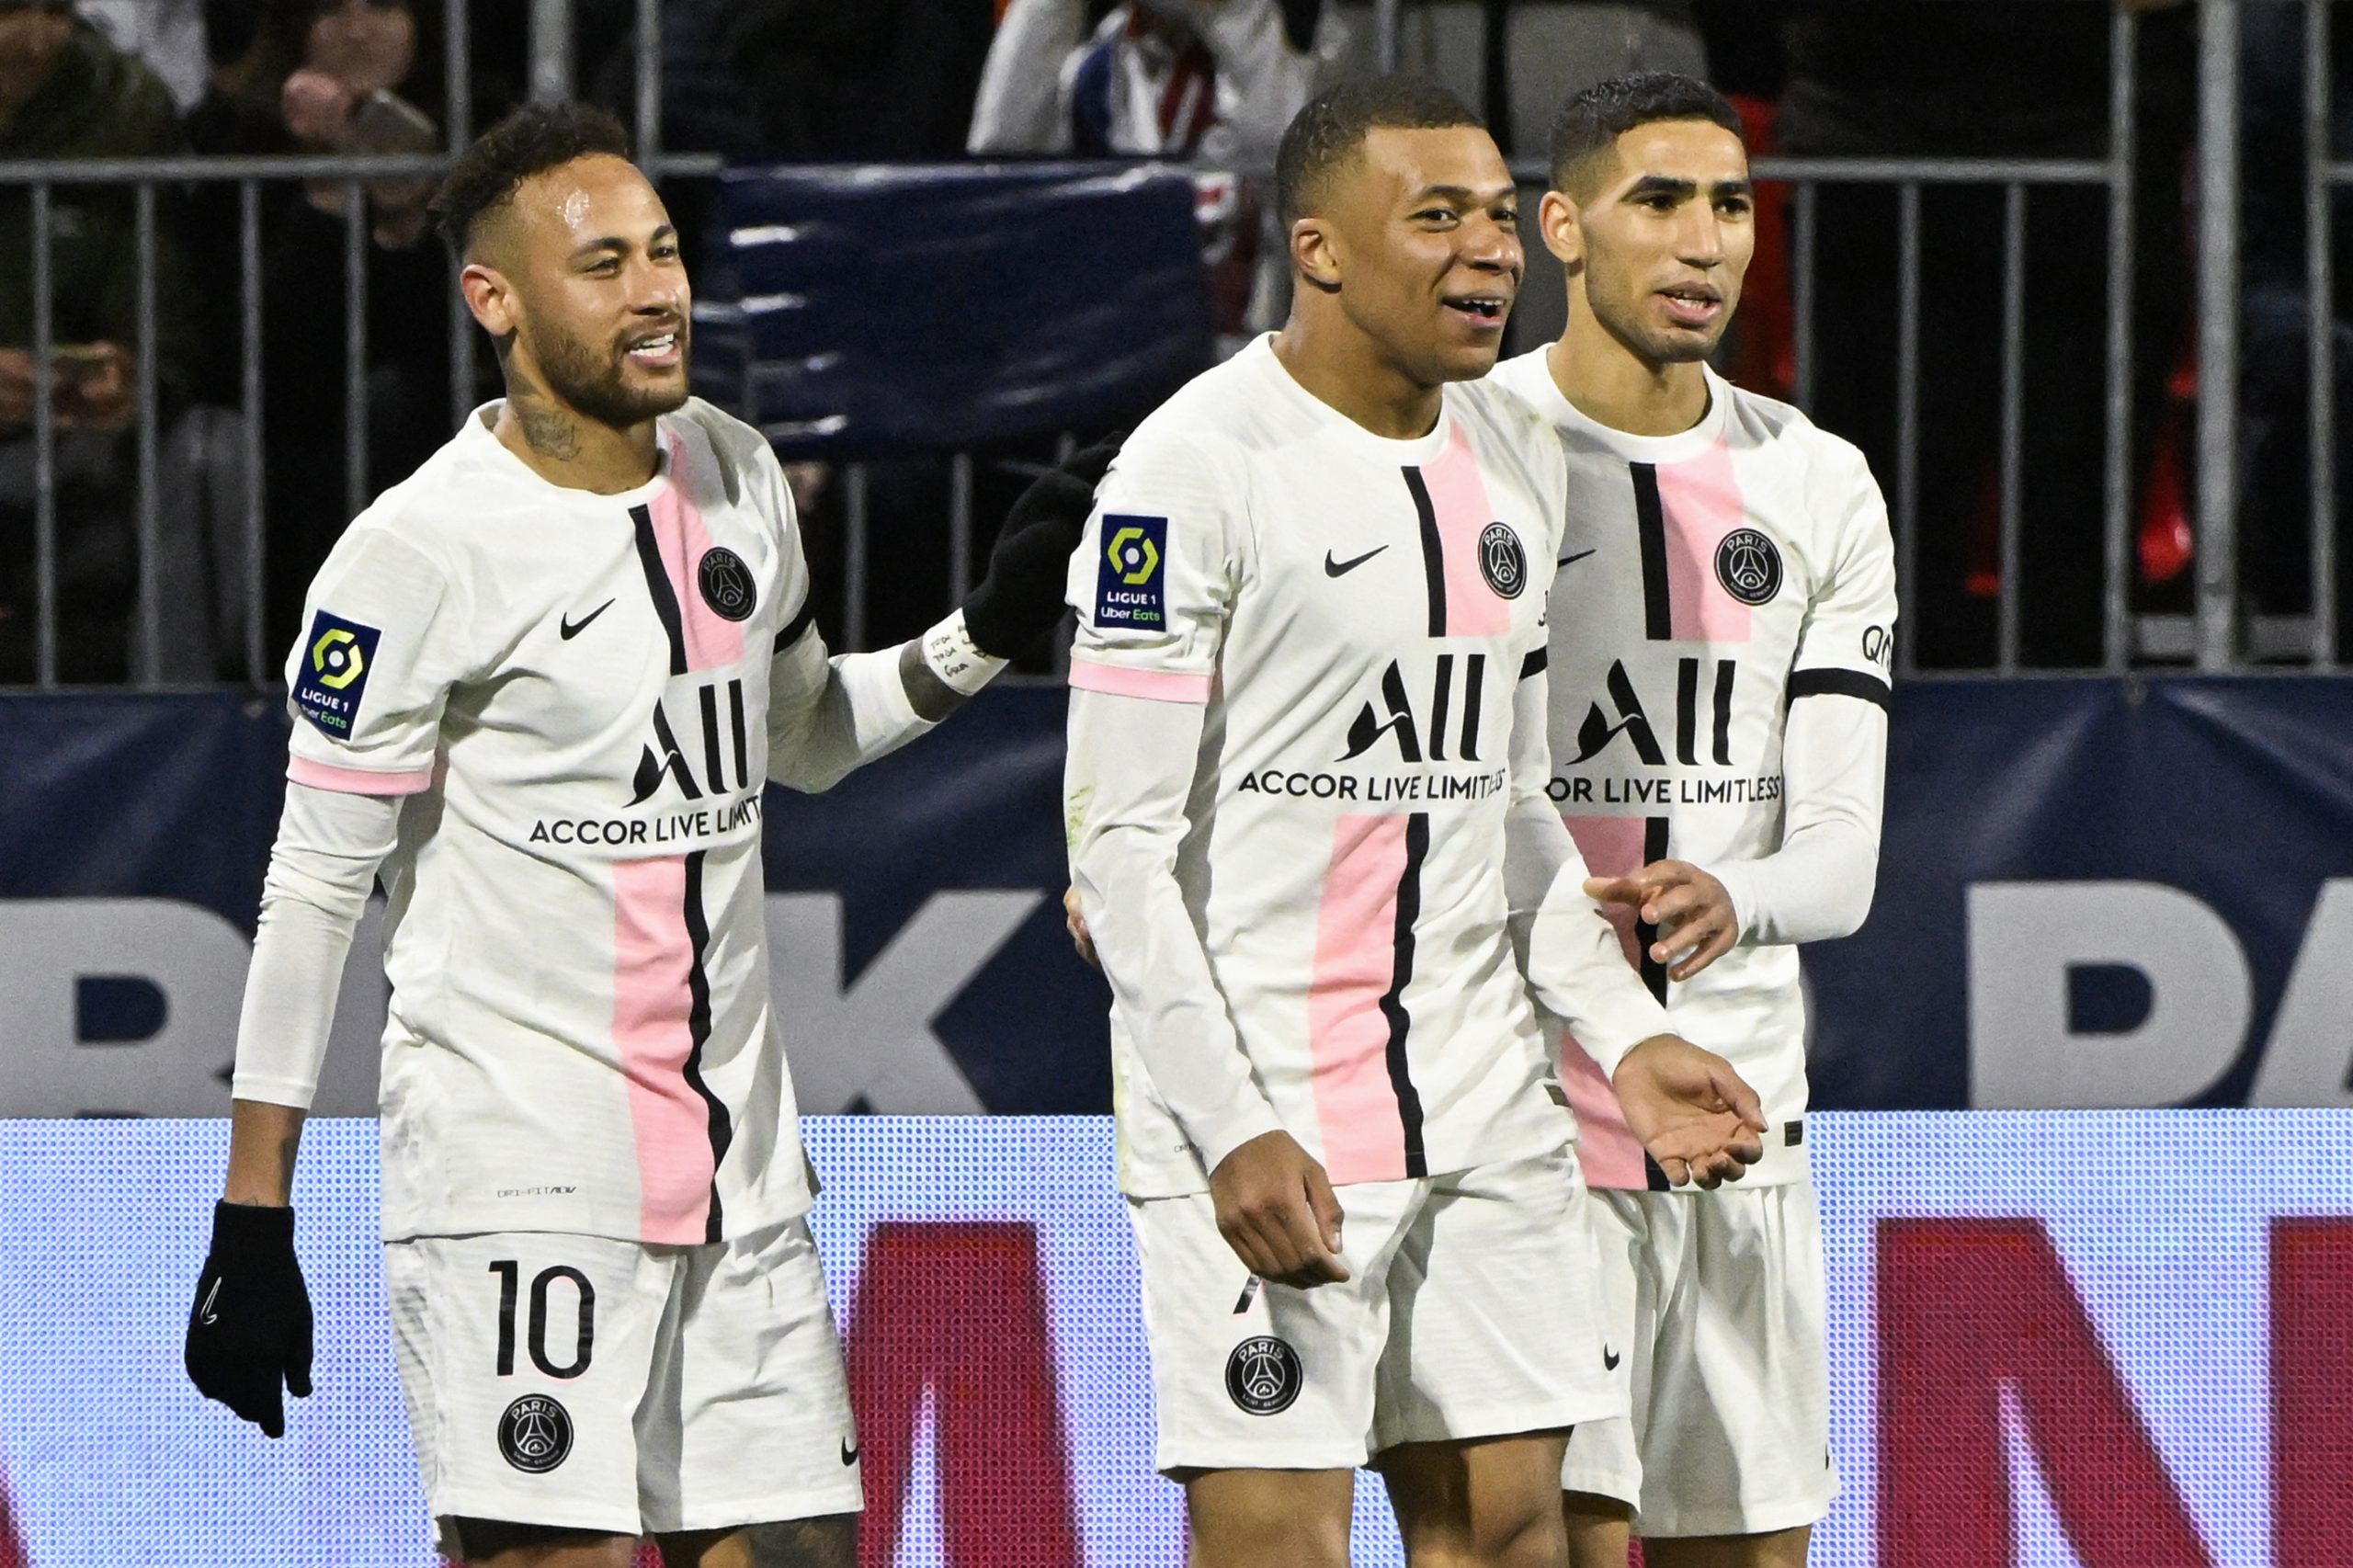 PSG not expected to add star to badge for 10th title - Get French ...